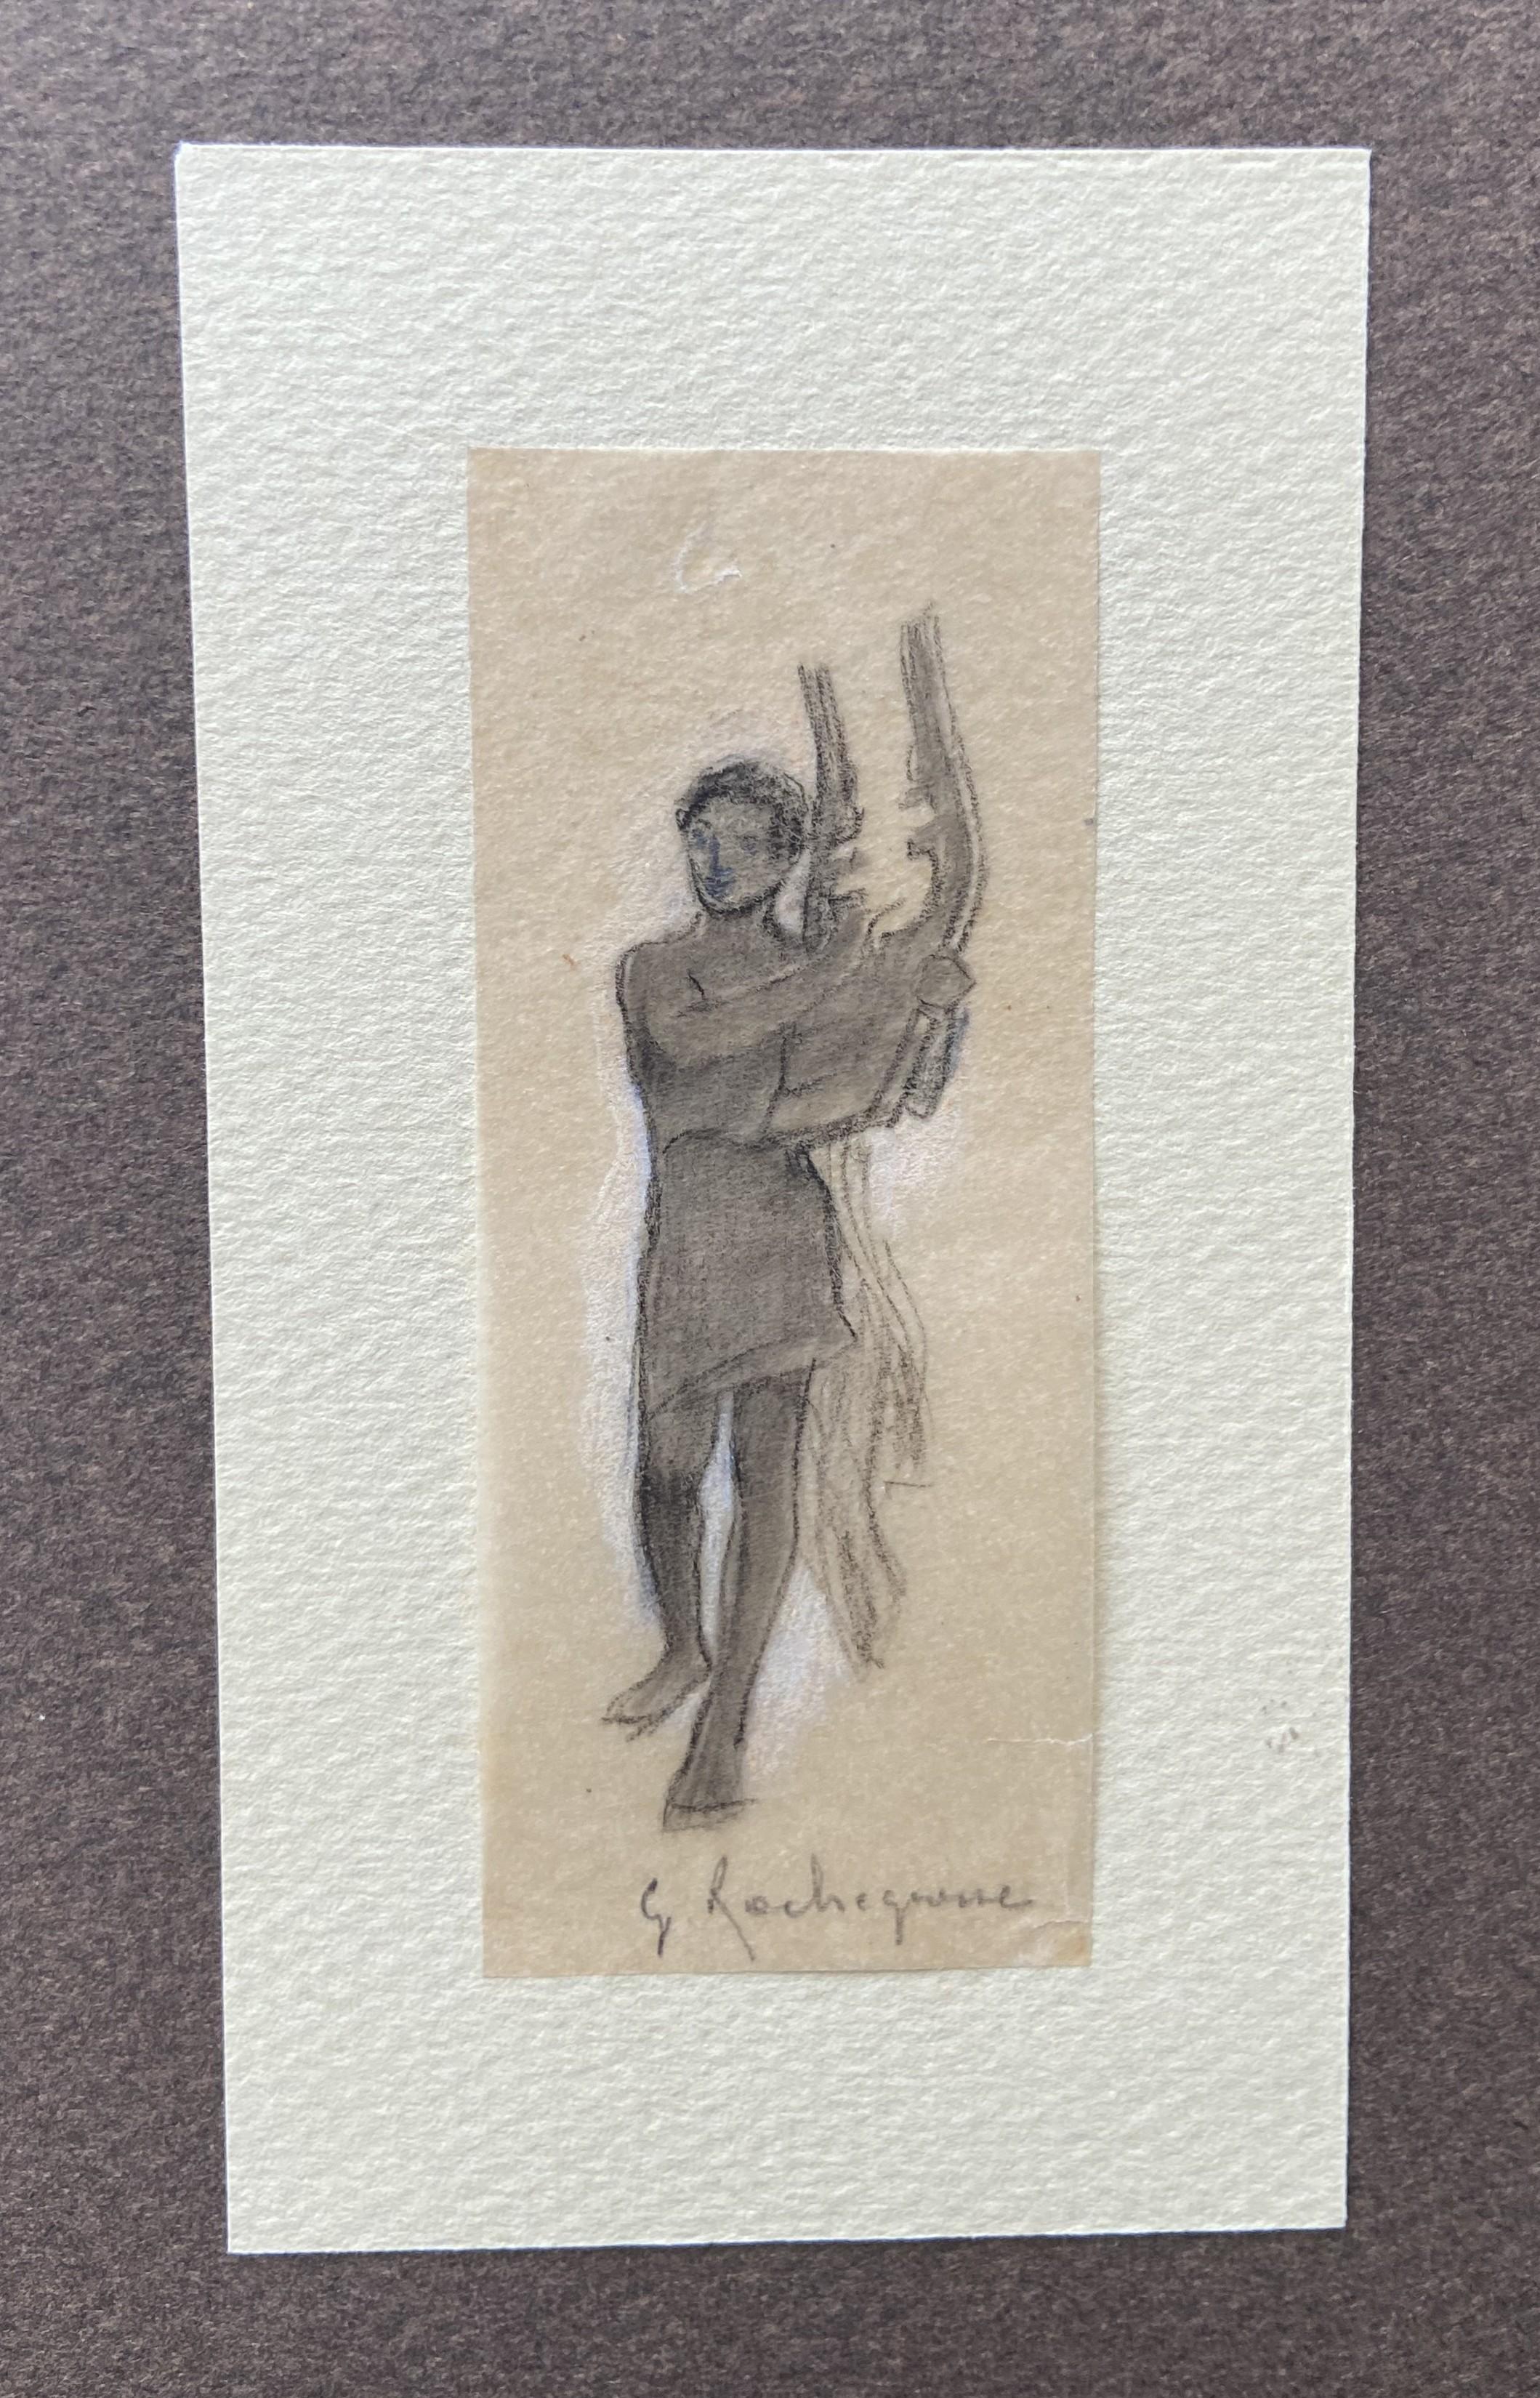 Georges Antoine Rochegrosse  (1859-1938) 
A zither player
carbon pencil on thin paper
8.5 x 3.3 cm
In good condition
Framed : 35 x 24 cm
Provenance: Estate of the artist and by Inheritance to the former owner

This tiny drawing is like a concentrate